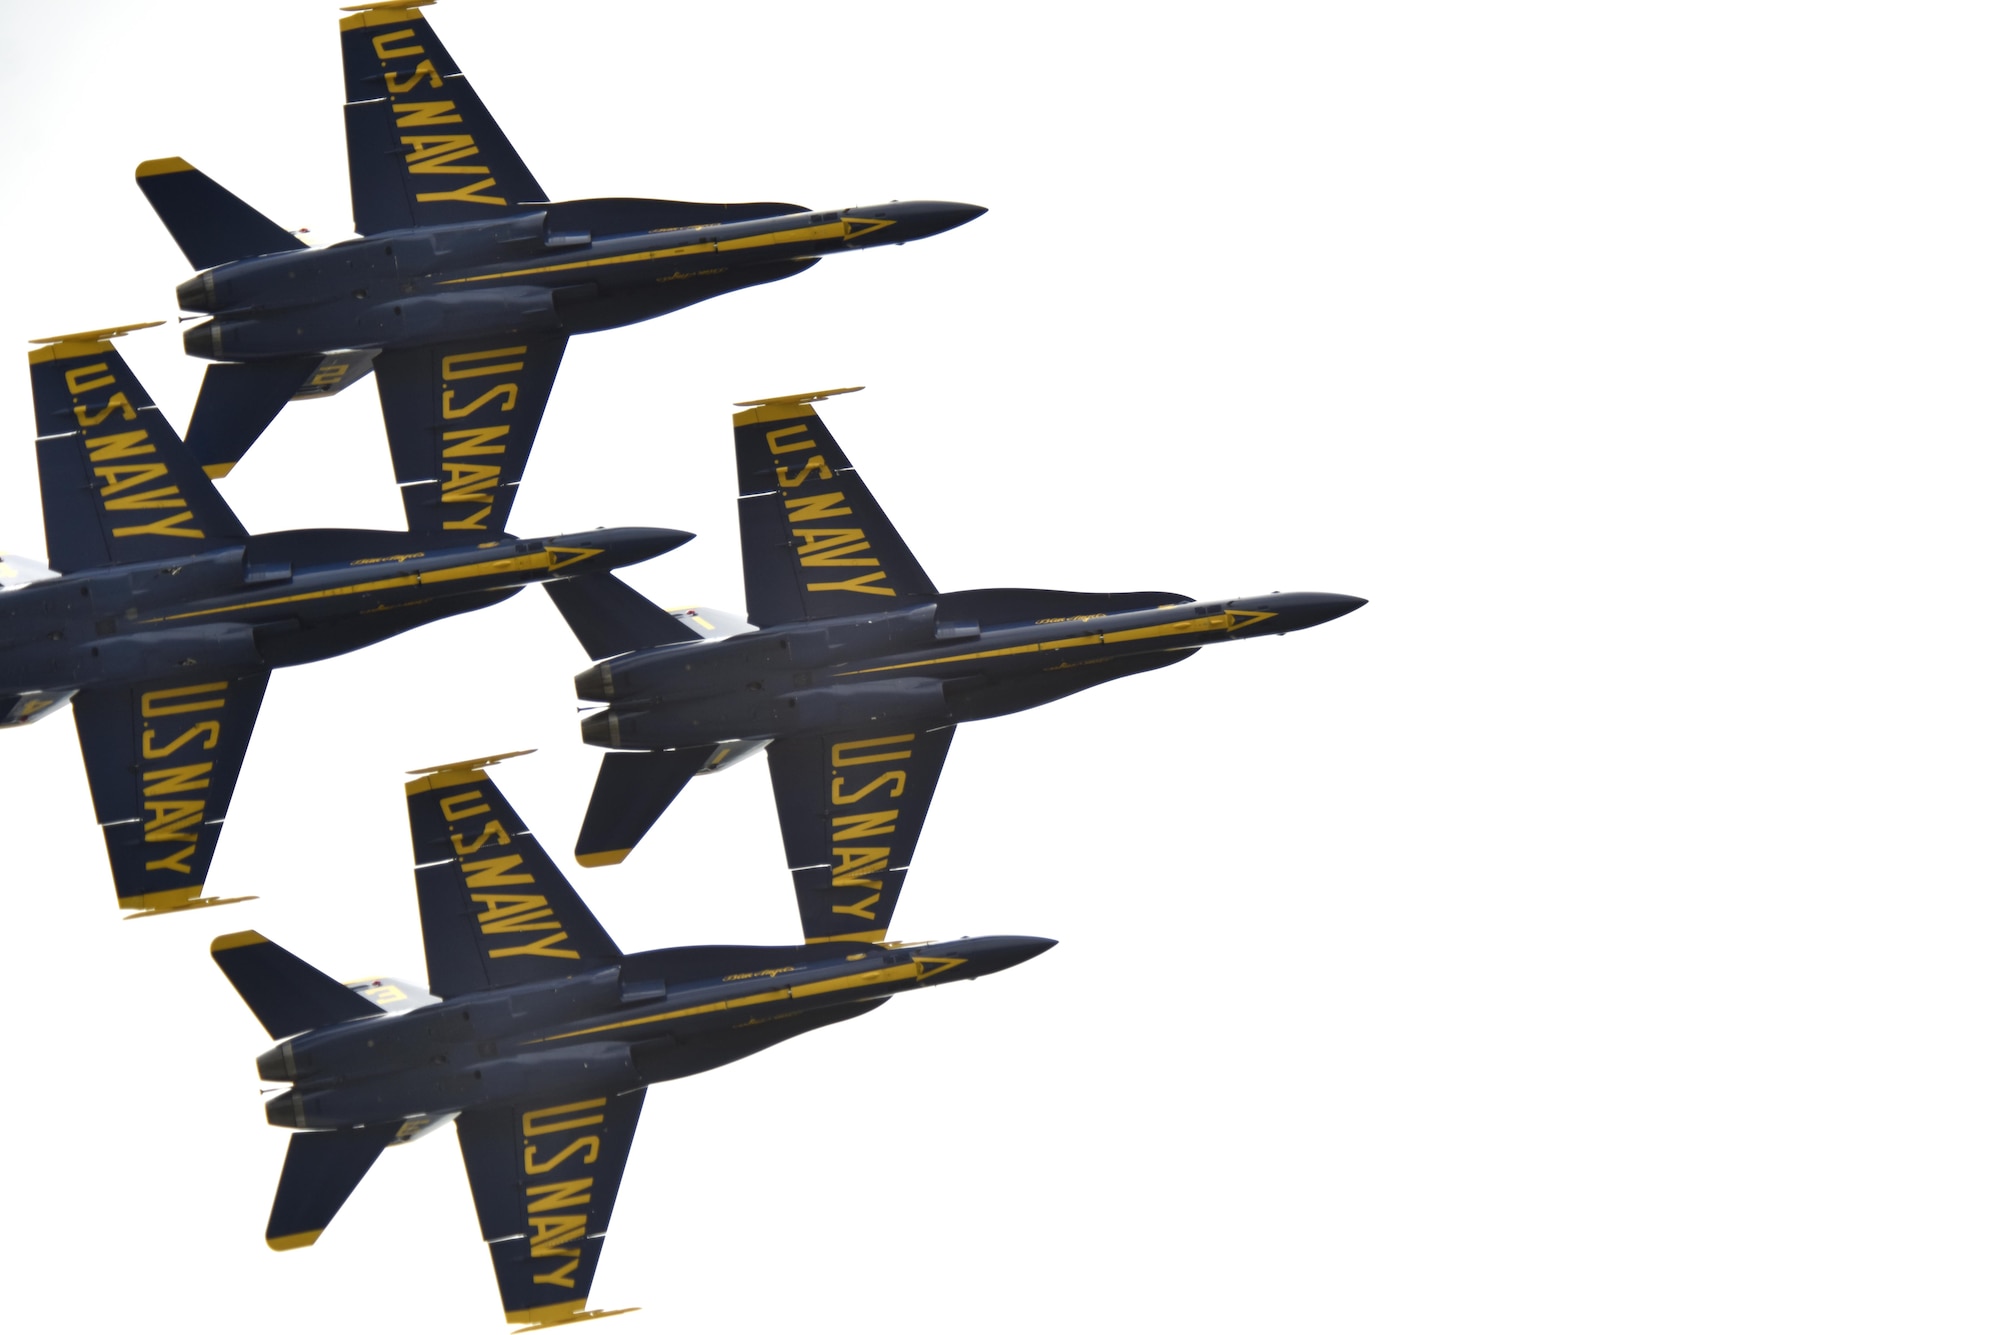 The U.S. Navy Blue Angels fly over Seymour Johnson Air Force Base, North Carolina, May 21, 2017, during the Wings Over Wayne Air Show. The air show was a free, two-day event that featured 11 aerial demonstrations, aircraft static displays, military working dog demonstrations and other events. (U.S. Air Force photo by Airman 1st Class Christopher Maldonado)